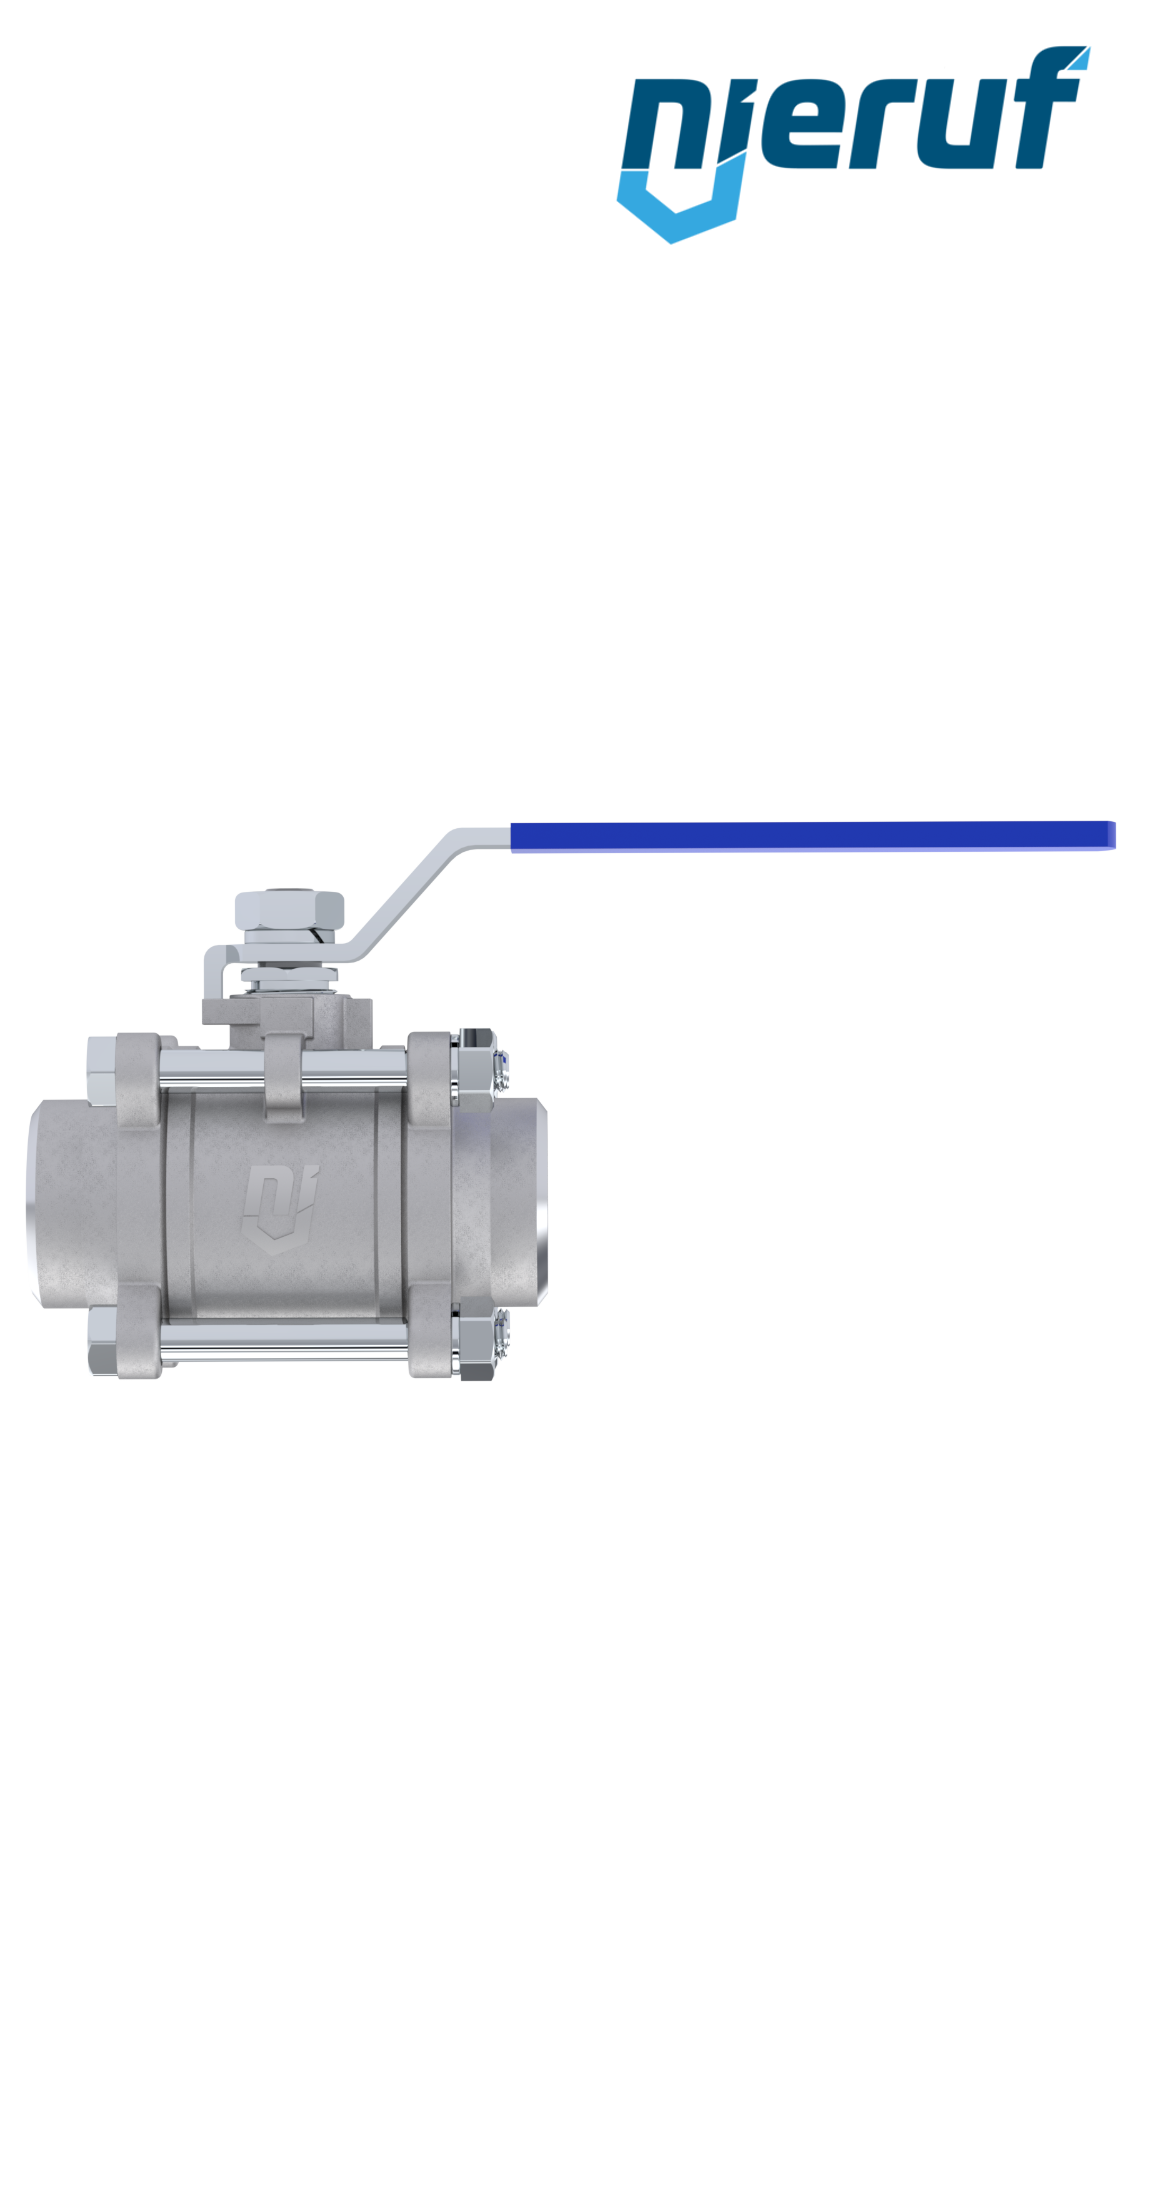 ball valve made of stainless steel DN80 - 3" inch GK04 with butt weld